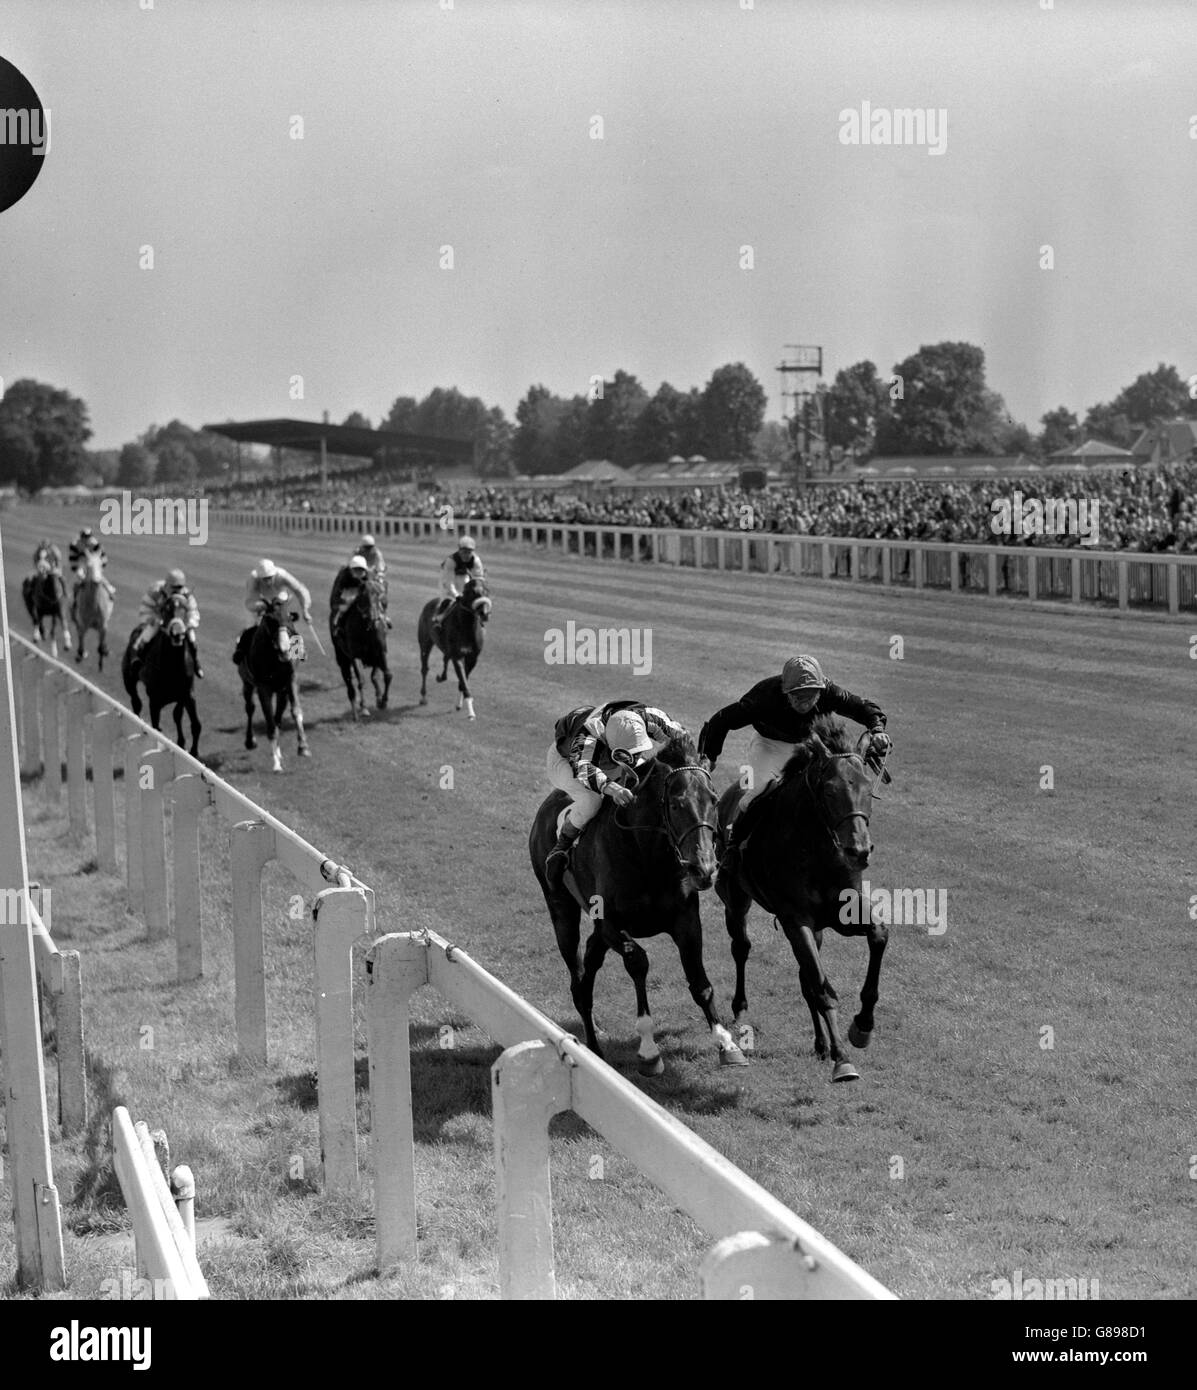 Mr H.J. Joel's Sandro, ridden by D. Keith (r) battles out the finish with Mrs David Montagu's M.I.5 (J. Lindley) in the Limelight Handicap at the Kempton Park meeting. In a photo finish, Sandro got the verdict by a short lead. Stock Photo